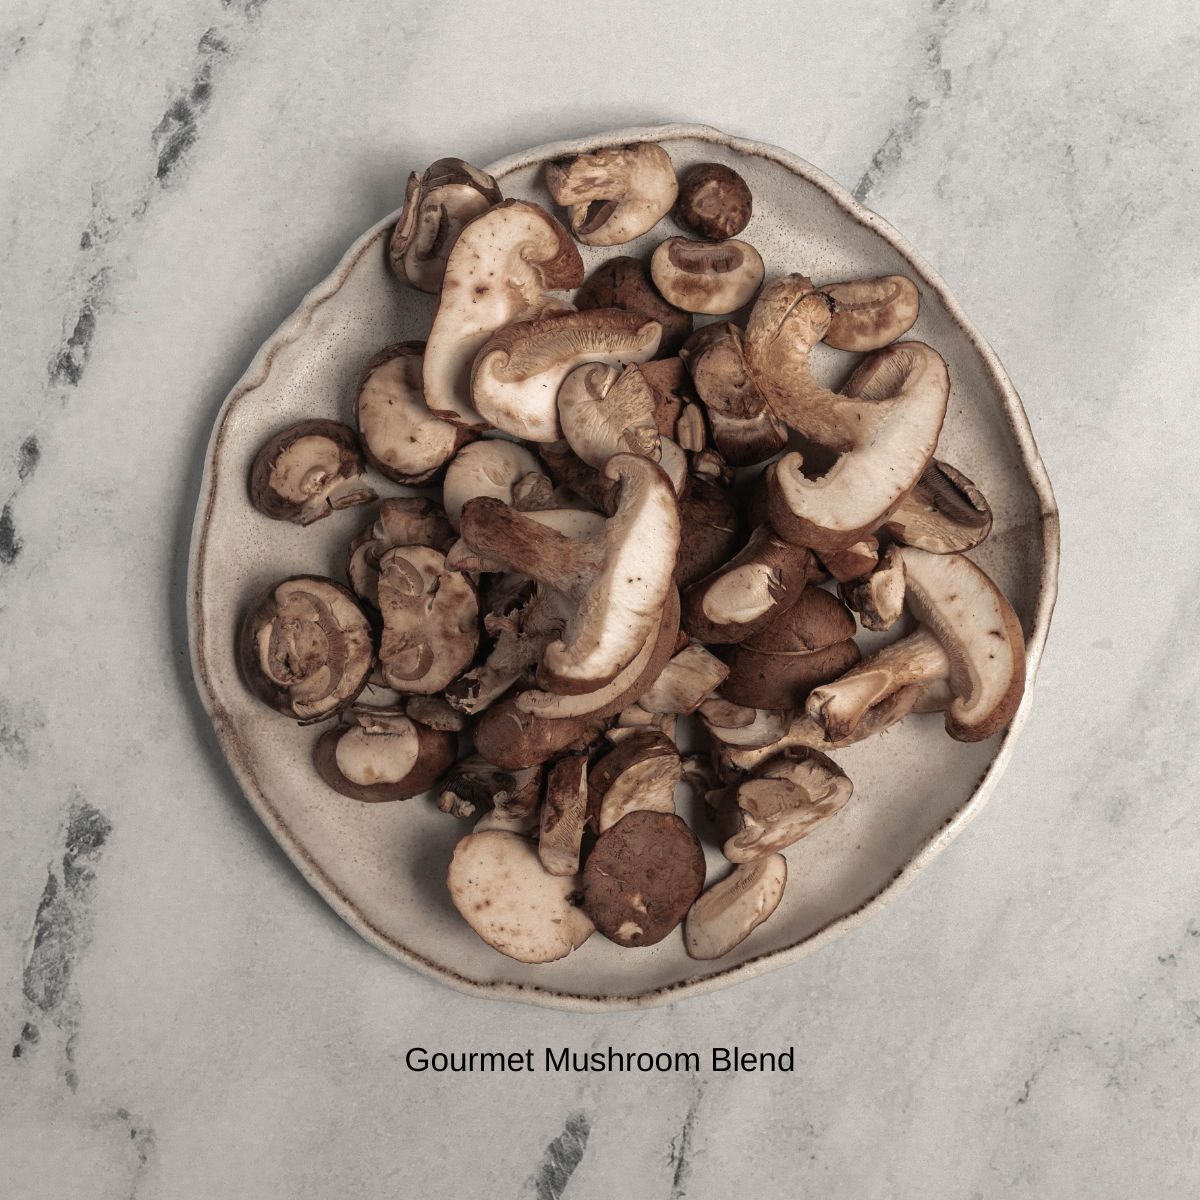 Ingredient image for Pumpkin and Mushroom Risotto. Shows sliced gourmet blend mushrooms.